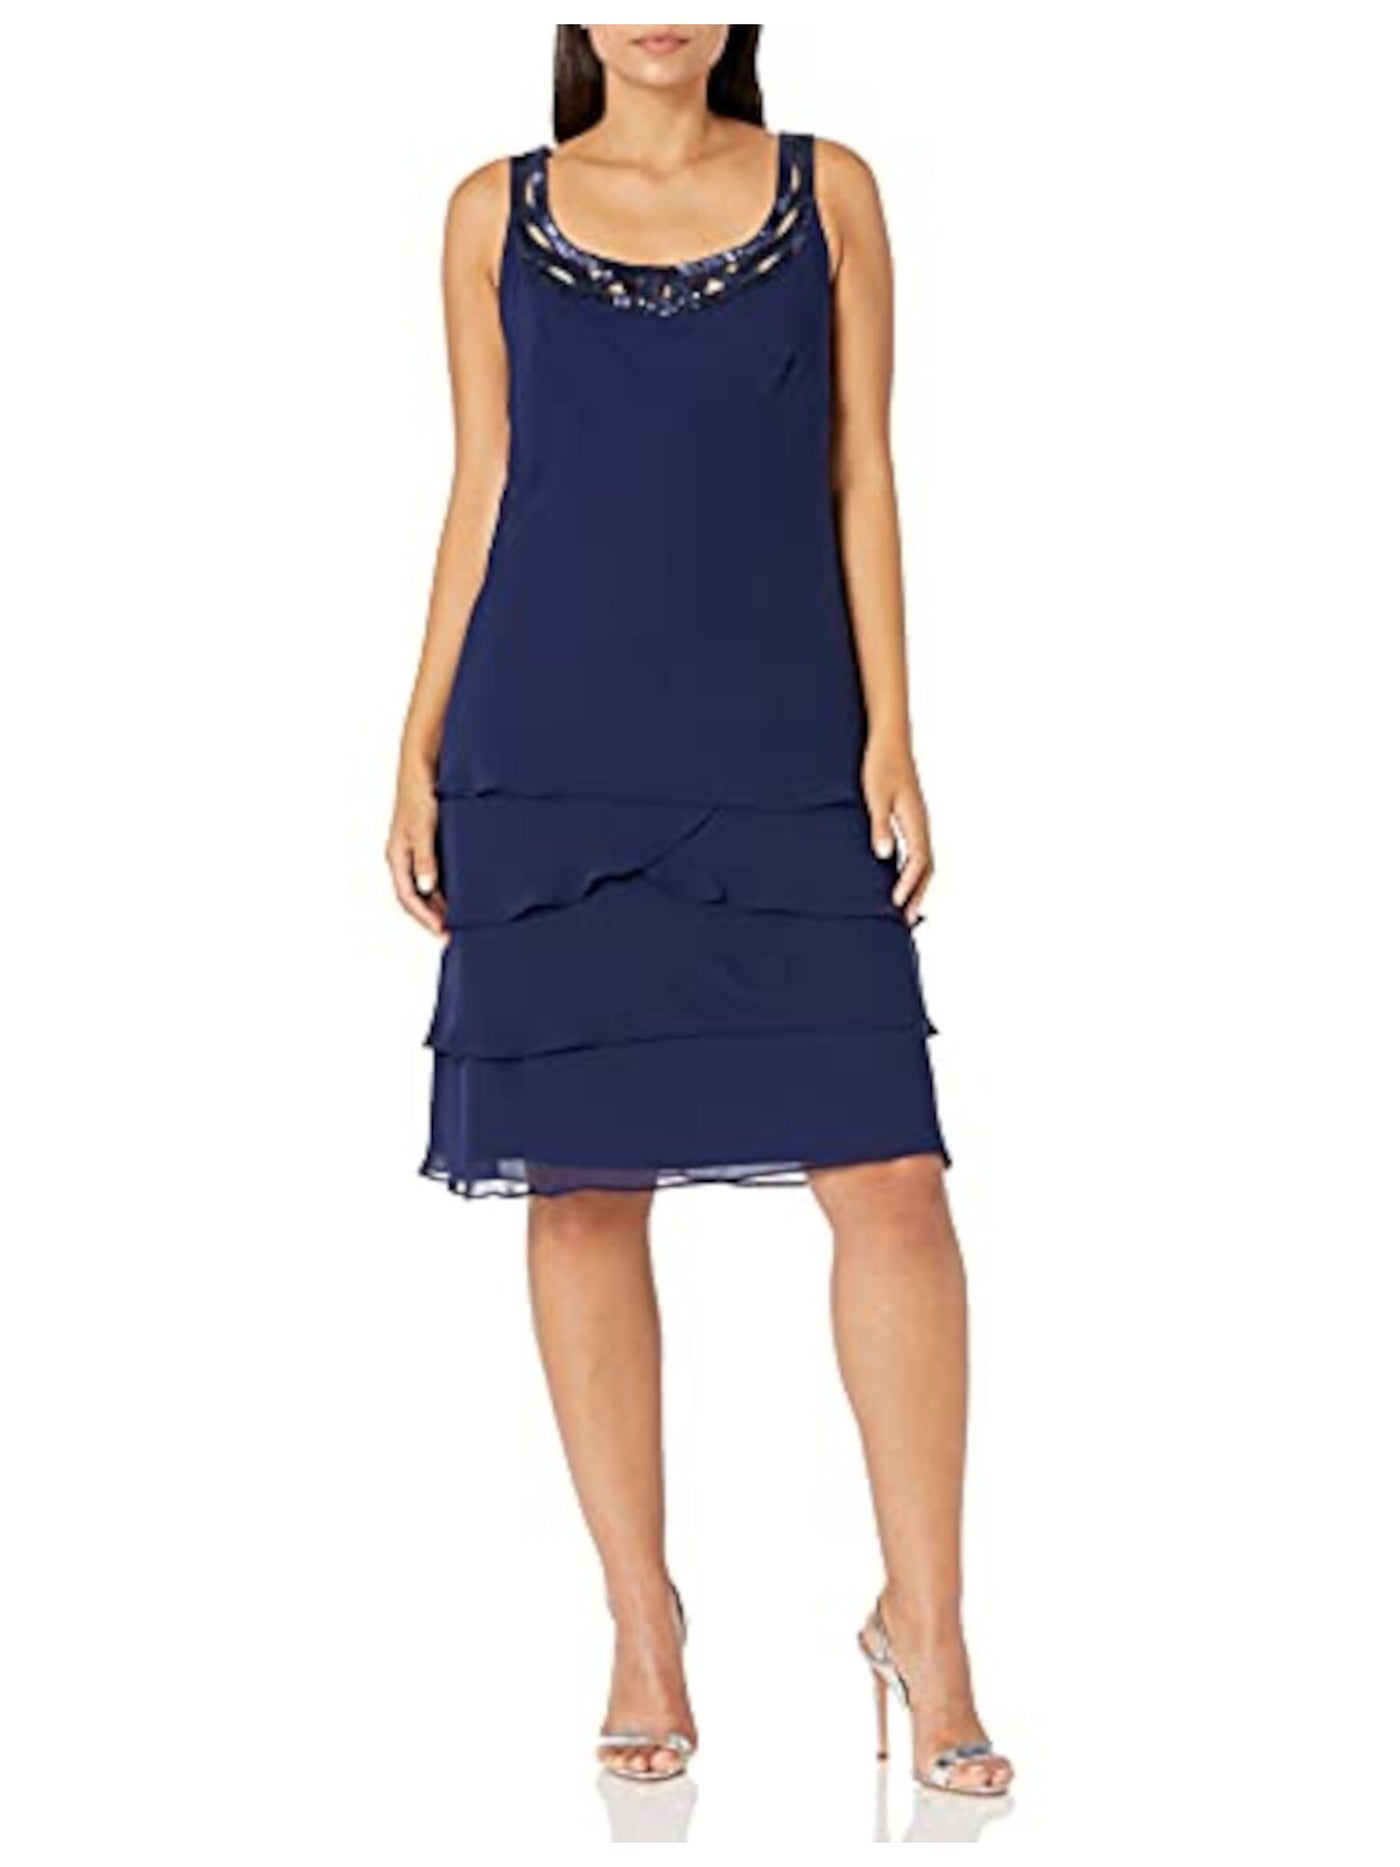 SLNY Womens Navy Sequined Teired With Jacket Sleeveless Scoop Neck Below The Knee Formal Sheath Dress 8